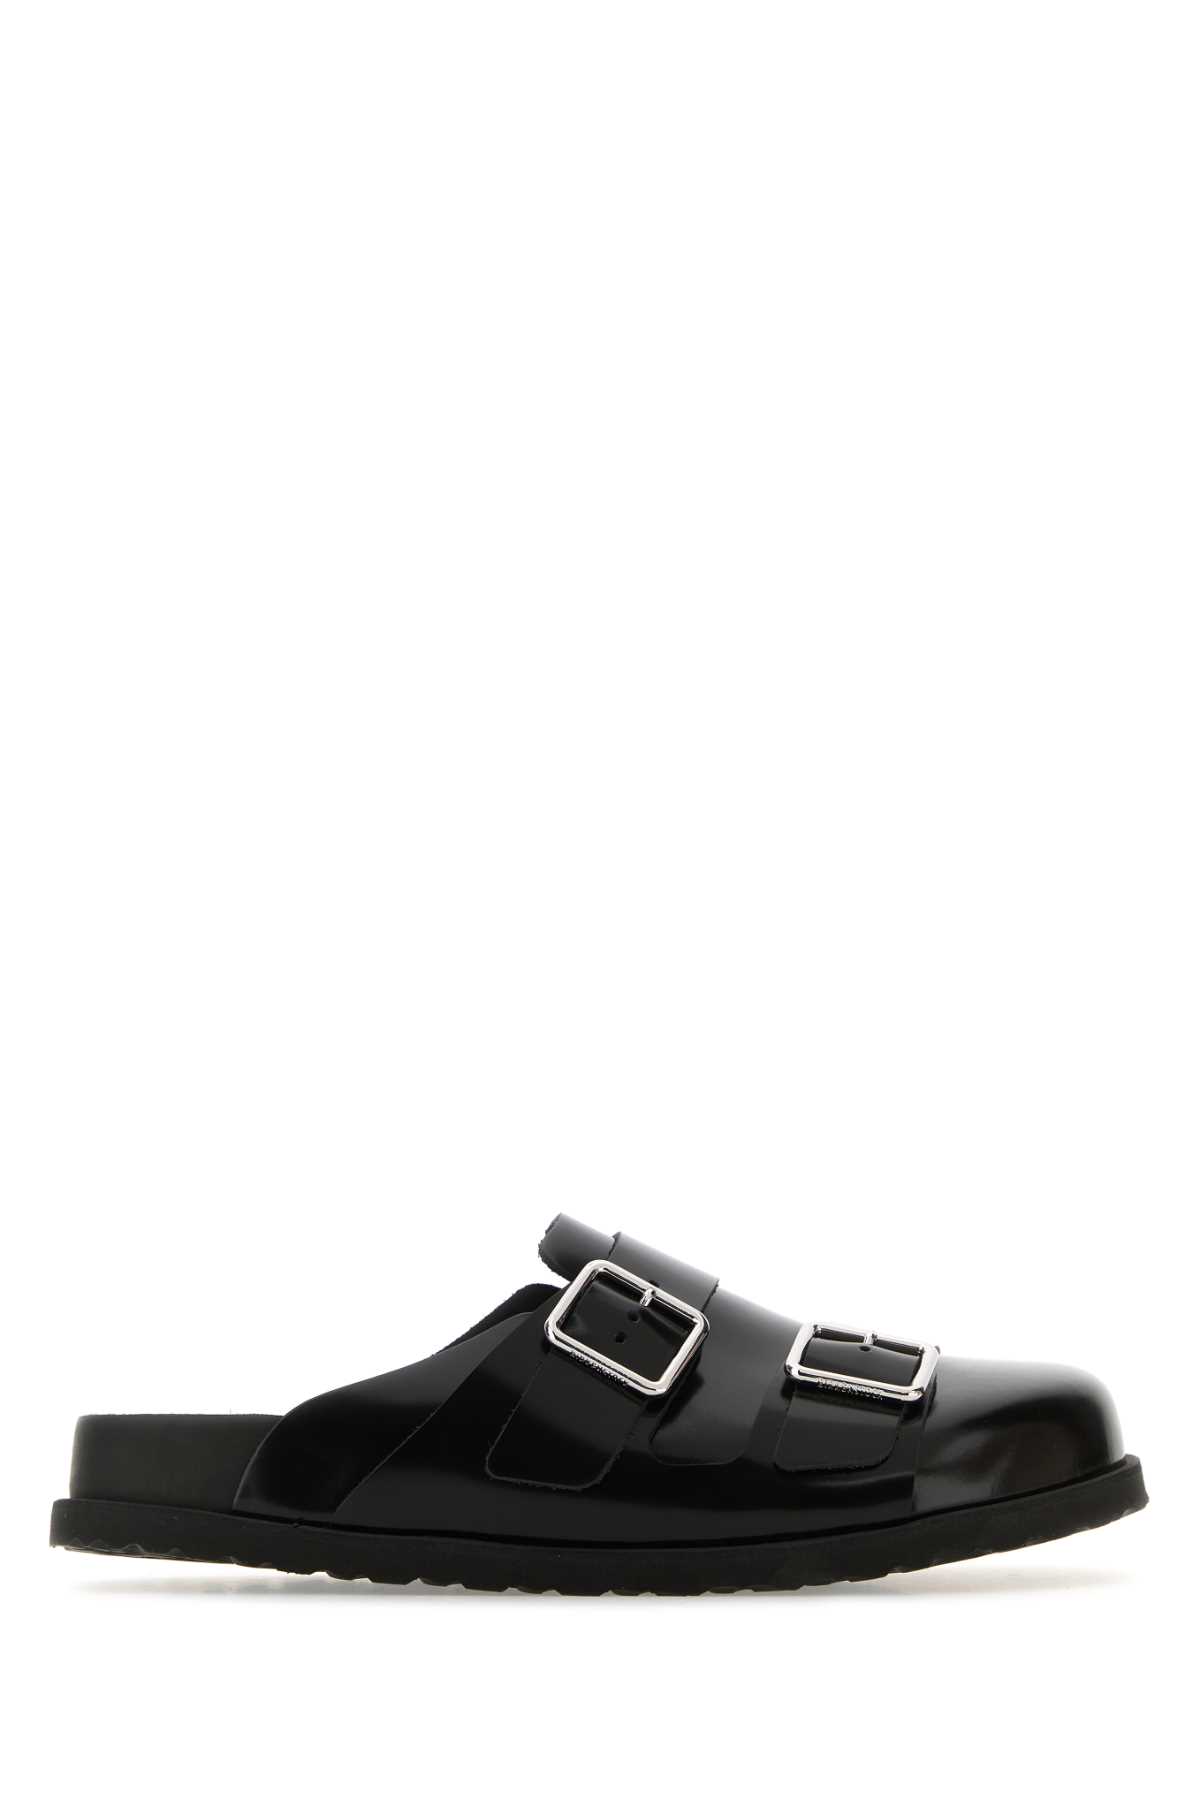 Black Leather 222 West Slippers